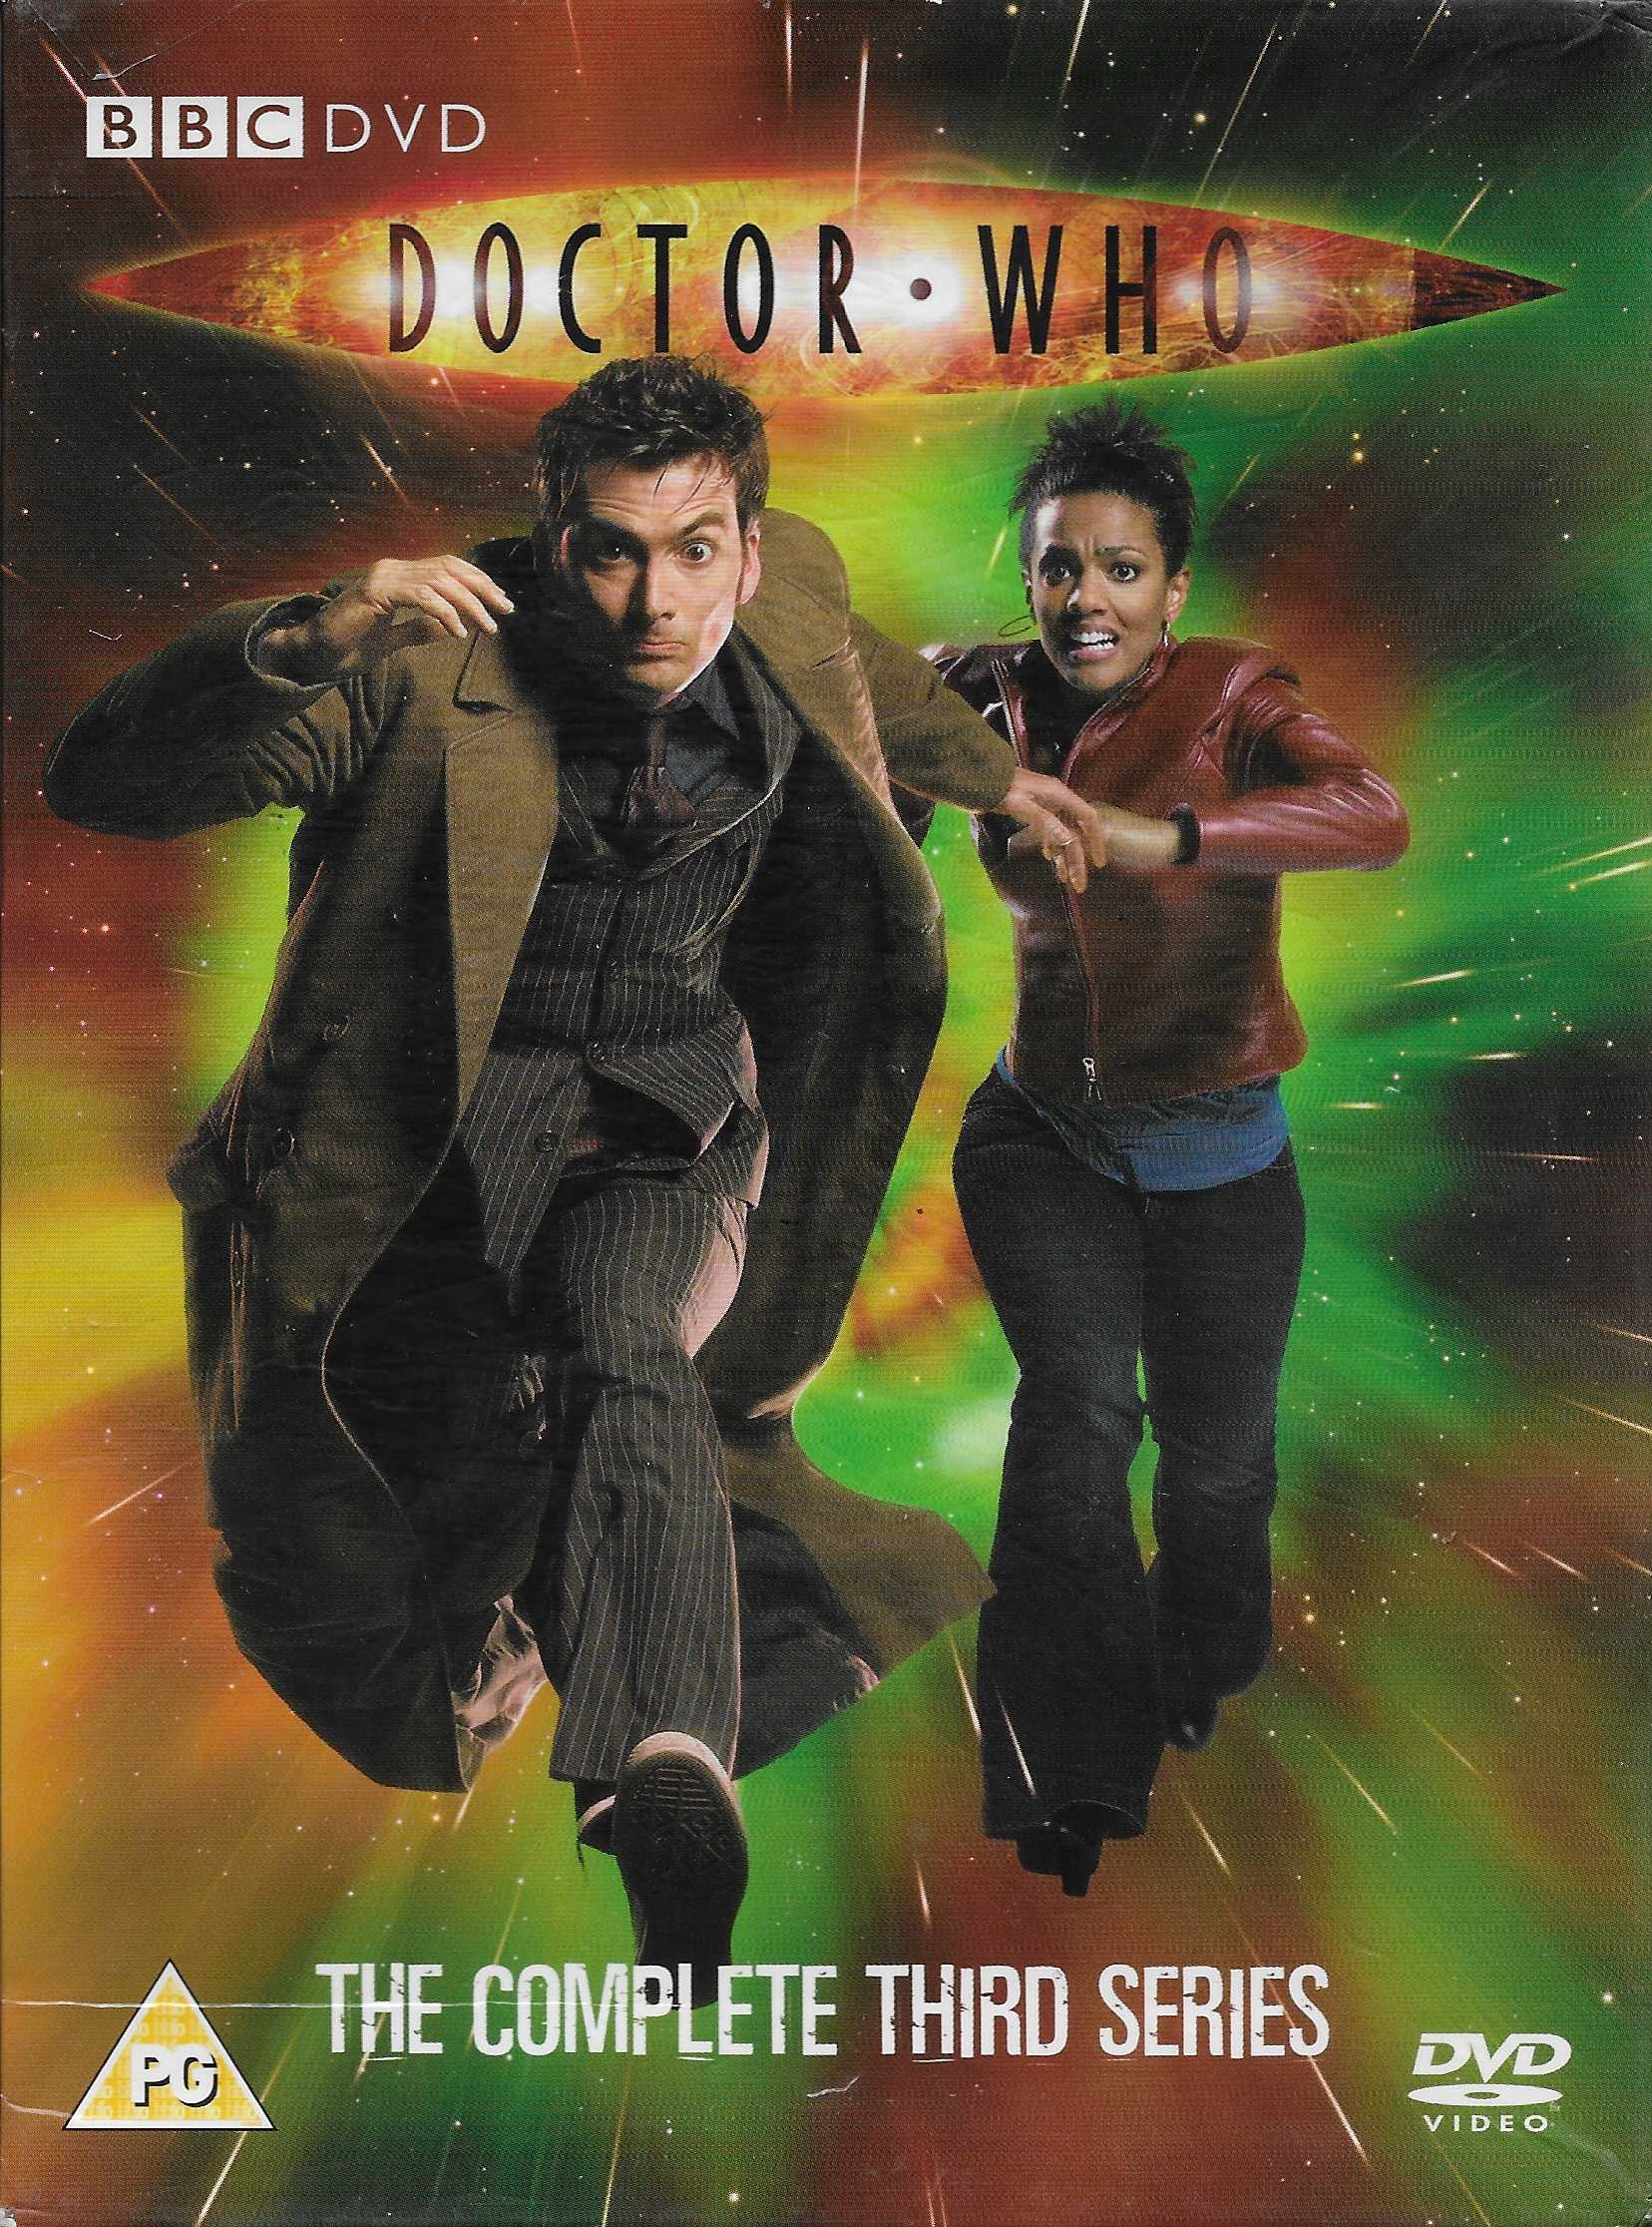 Picture of BBCDVD 2539 Doctor Who - Series 3 by artist Various from the BBC dvds - Records and Tapes library